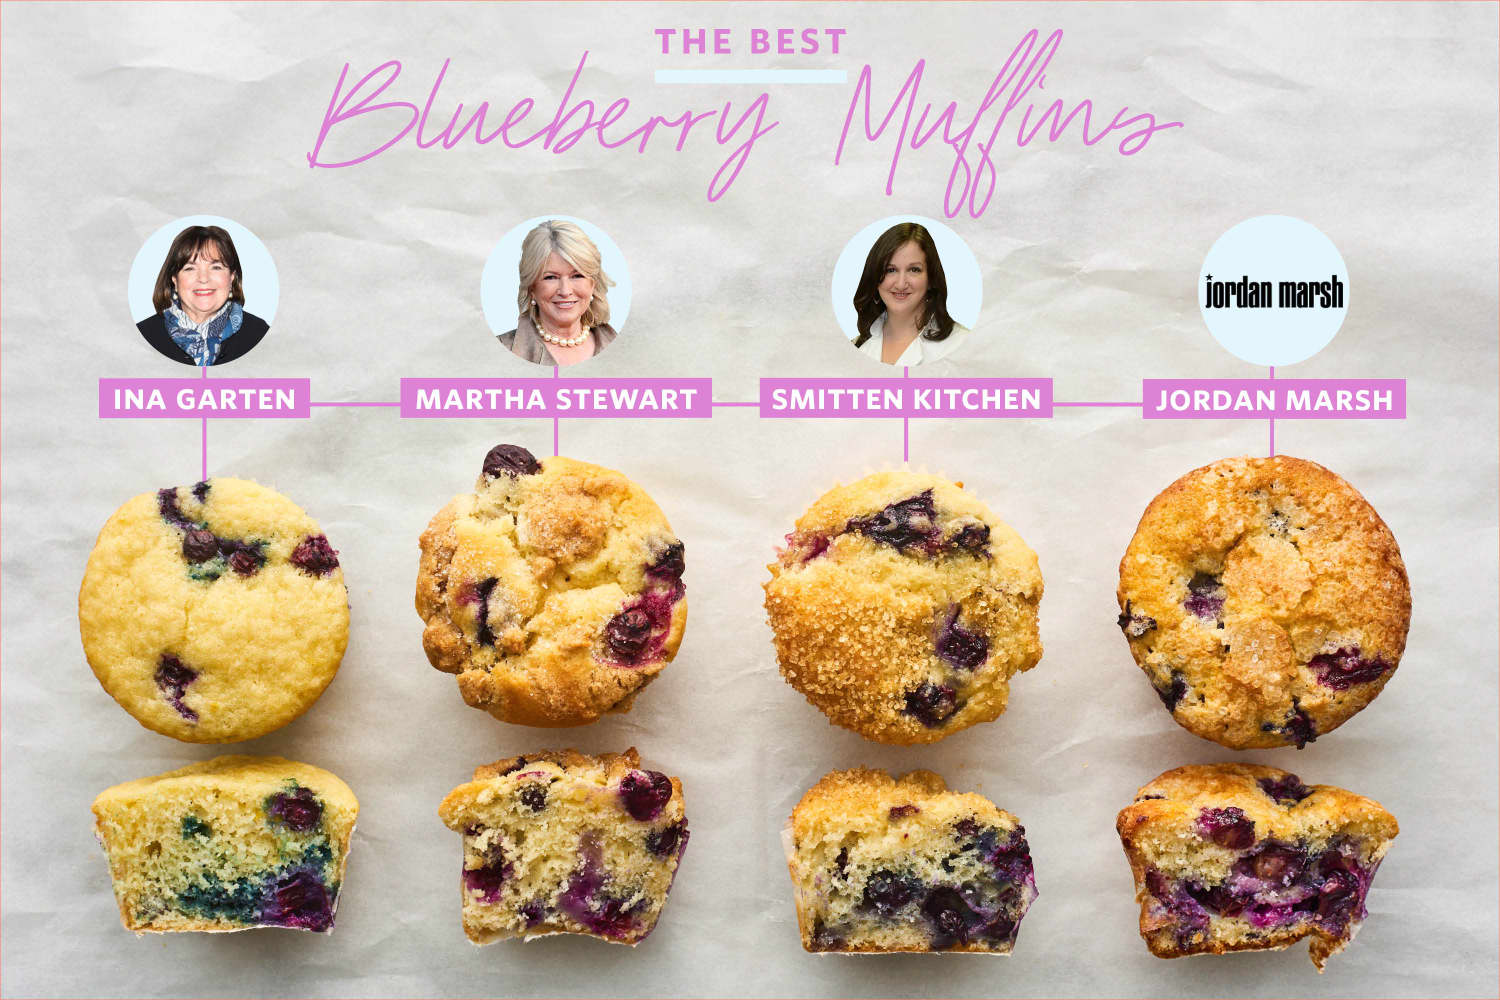 https://cdn.apartmenttherapy.info/image/upload/f_auto,q_auto:eco,c_fill,g_auto,w_1500,ar_3:2/k%2FPhoto%2FSeries%2F2019-07-battle-blueberry-muffins%2FGraphics%2Fblueberry-muffin-battle-roundup-lead